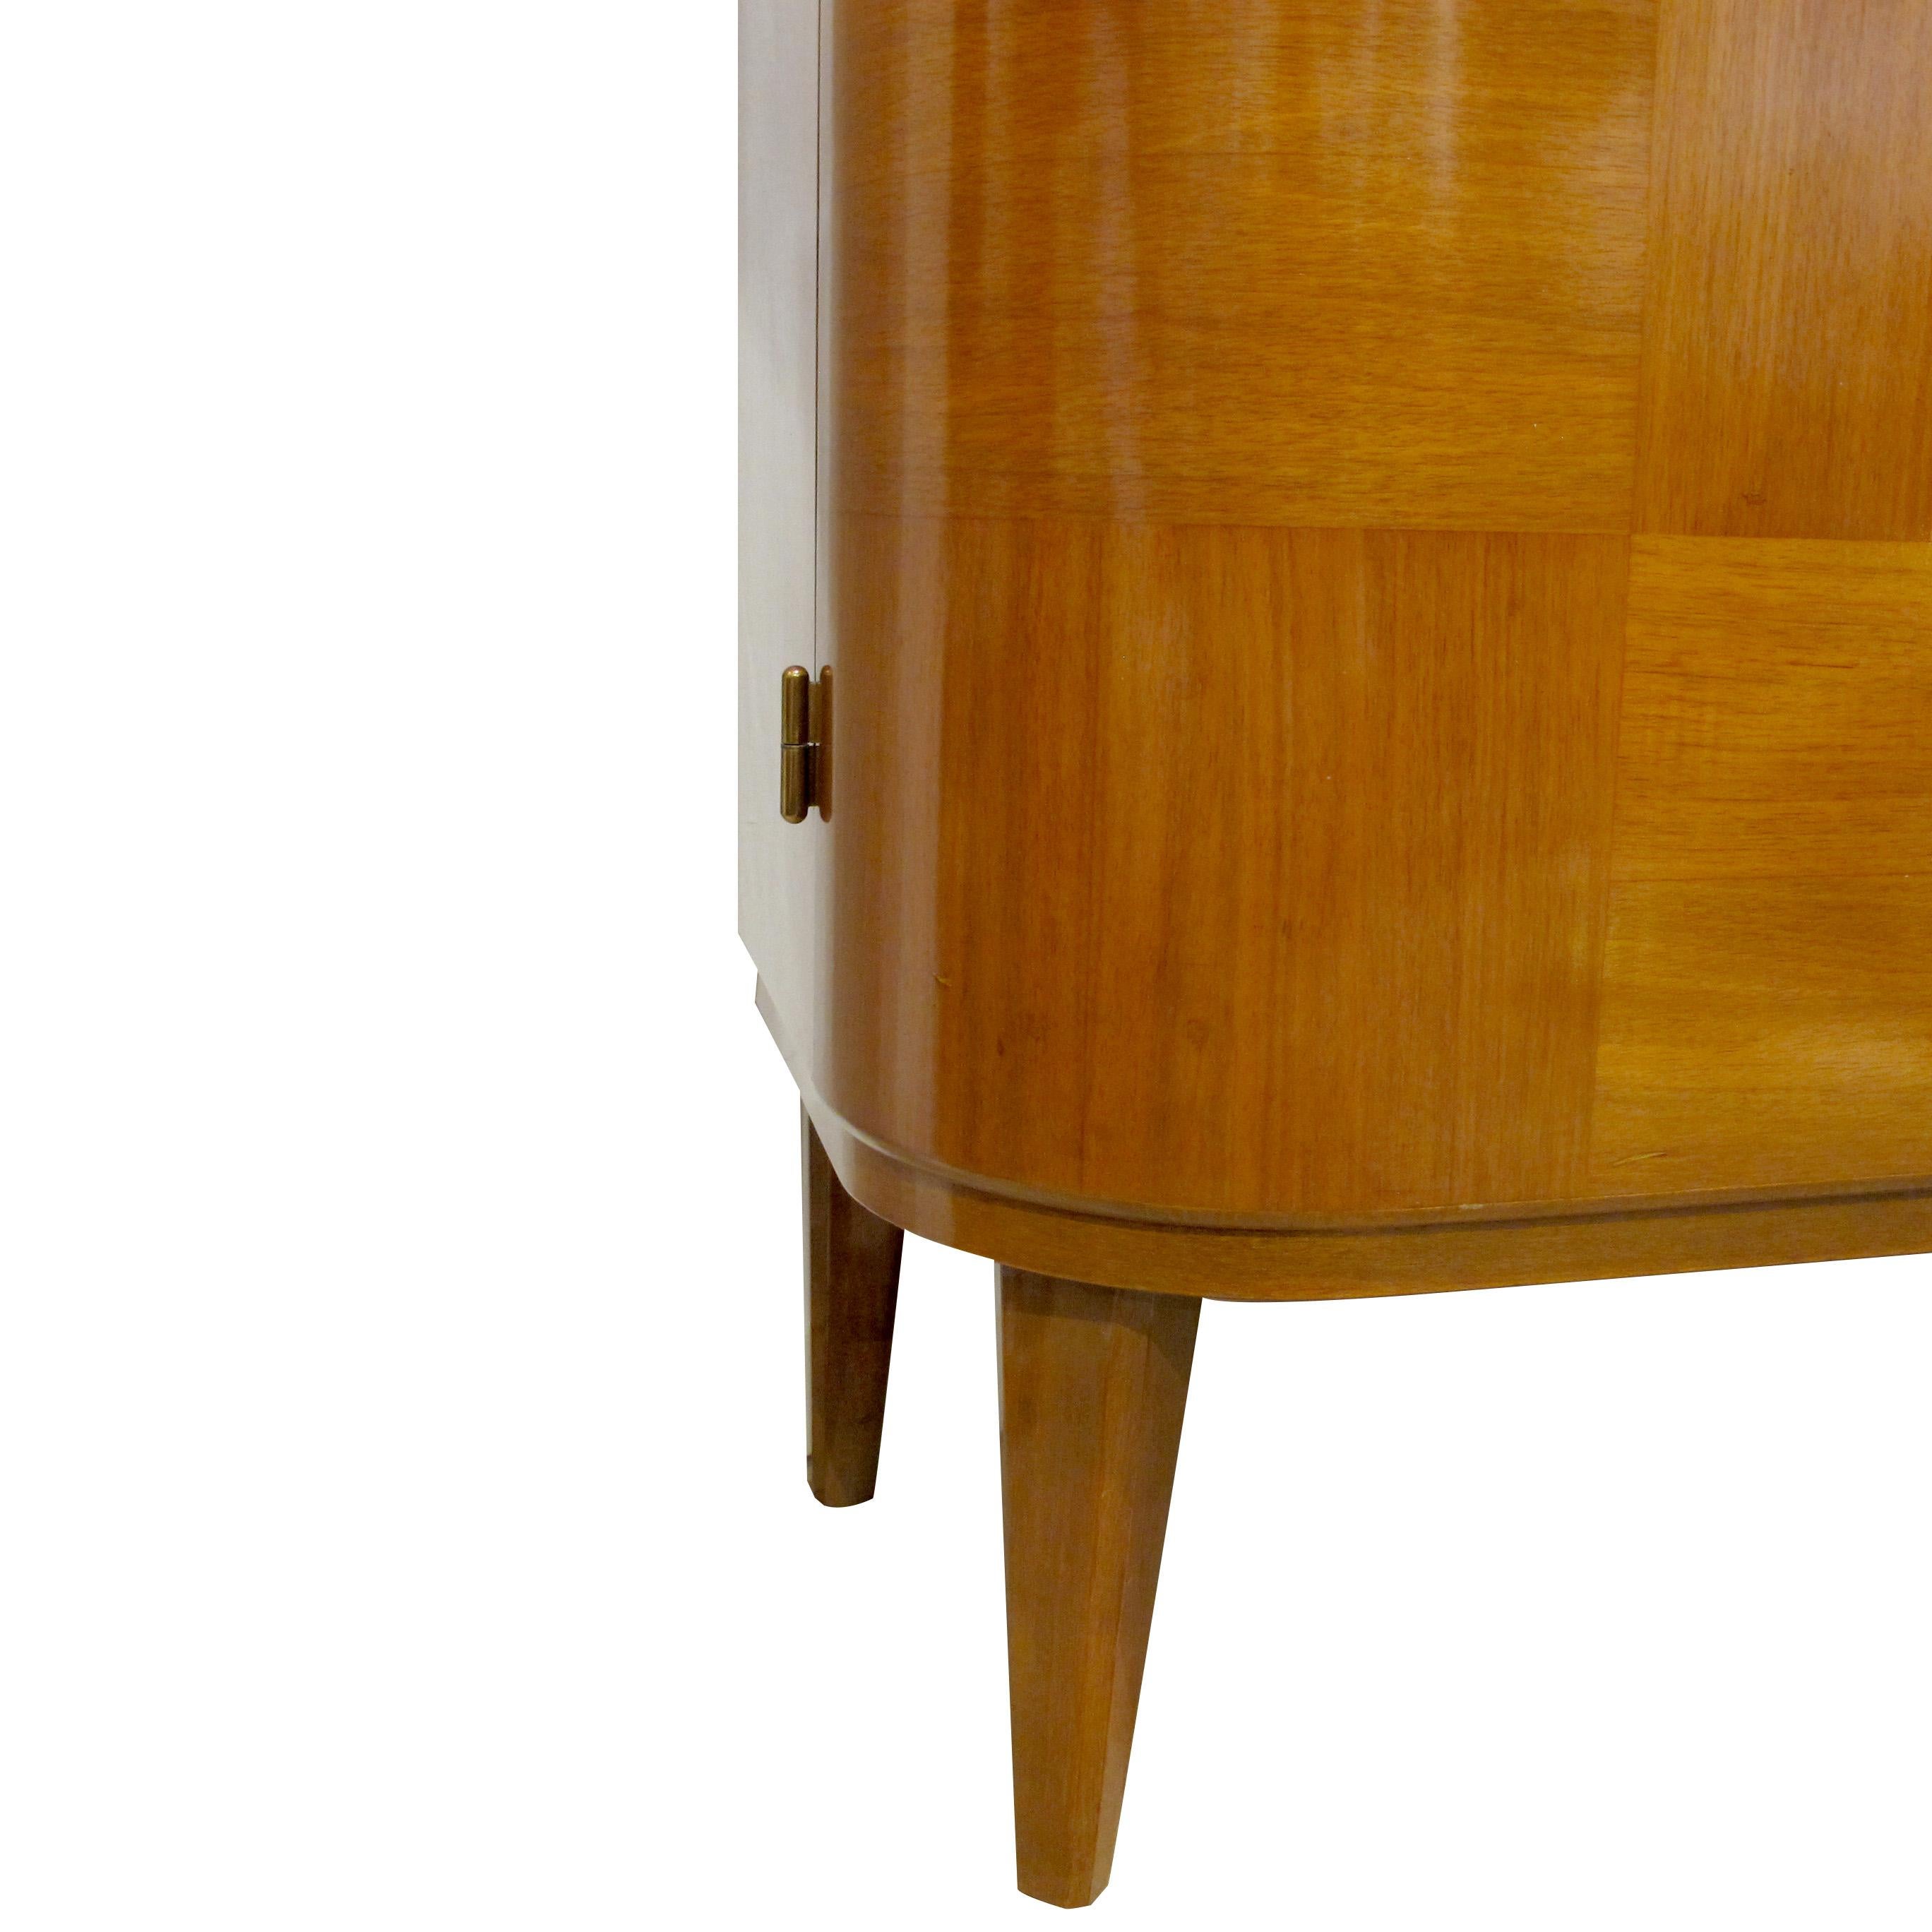 1930s/40s Art Deco Rare Sideboard with Curved edges by Carl Axel Acking  1